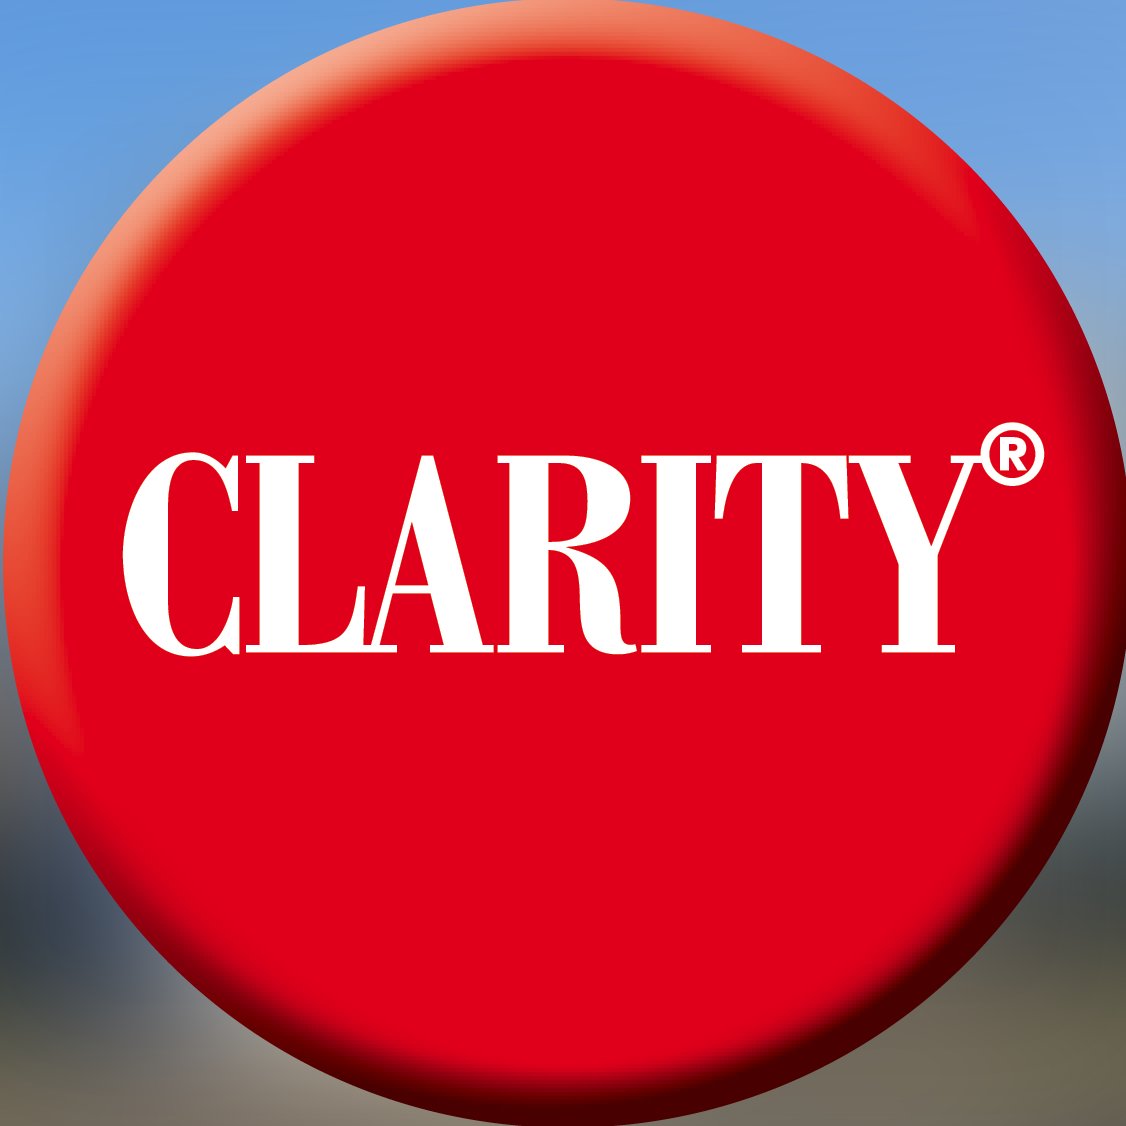 Founded in 1977, Clarity Copiers Limited has grown into one of the largest independent distributors of digital copier–printers in the UK